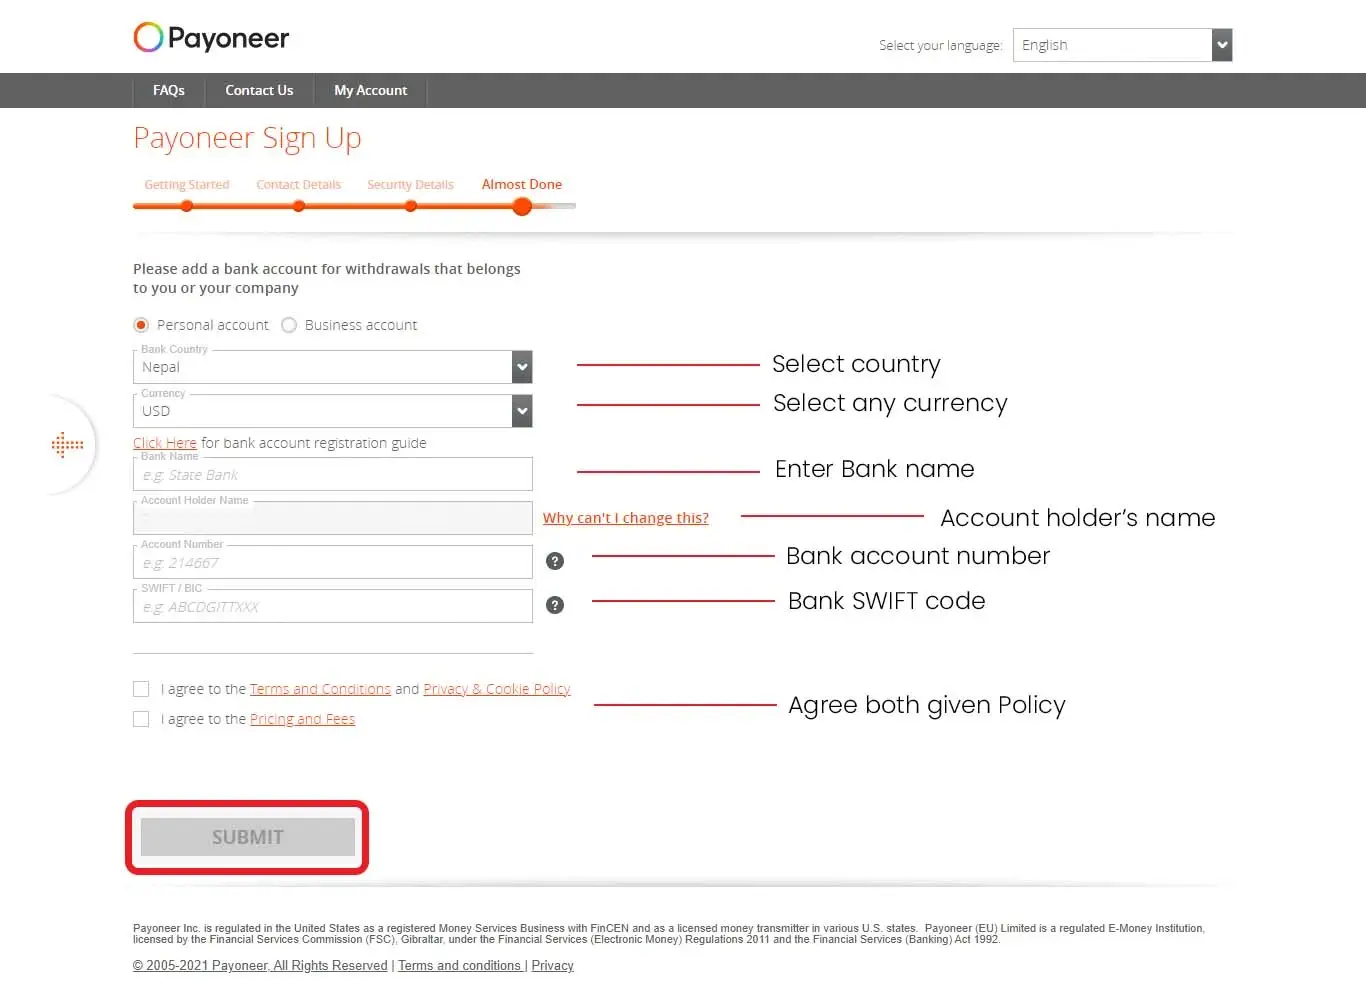 How to create Payoneer account in Nepal?